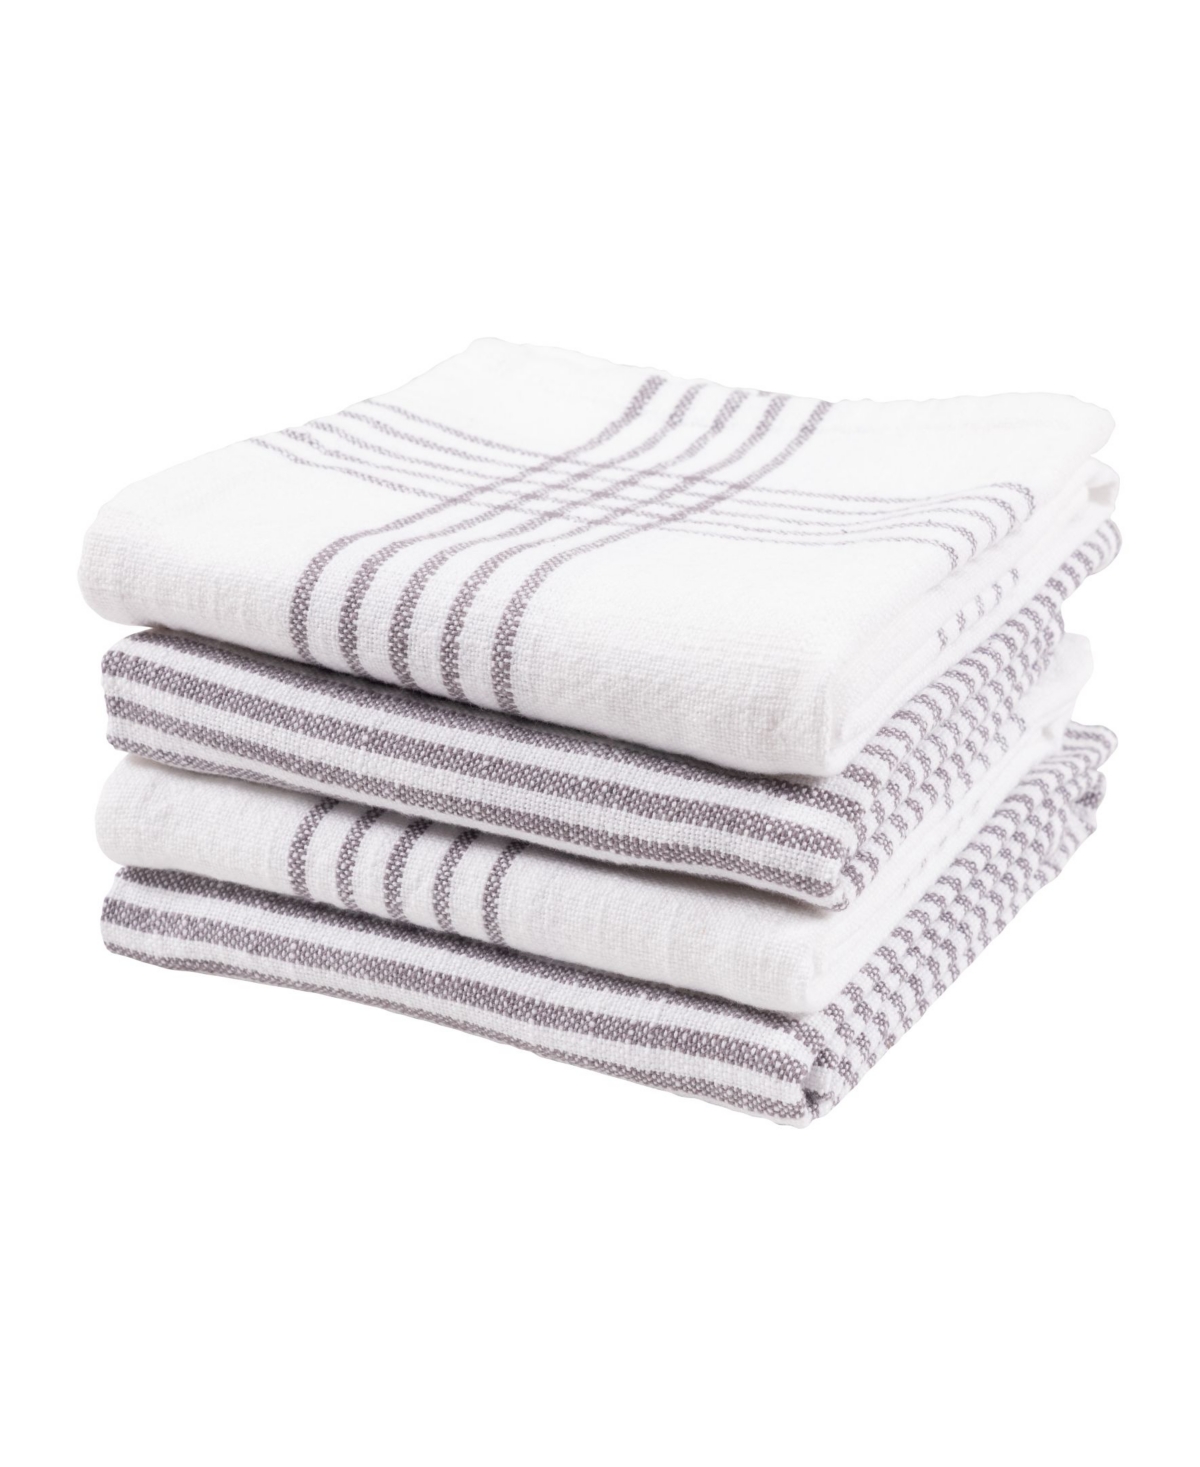 Monoco Relaxed Casual Kitchen Towel, Set of 4 - Gray